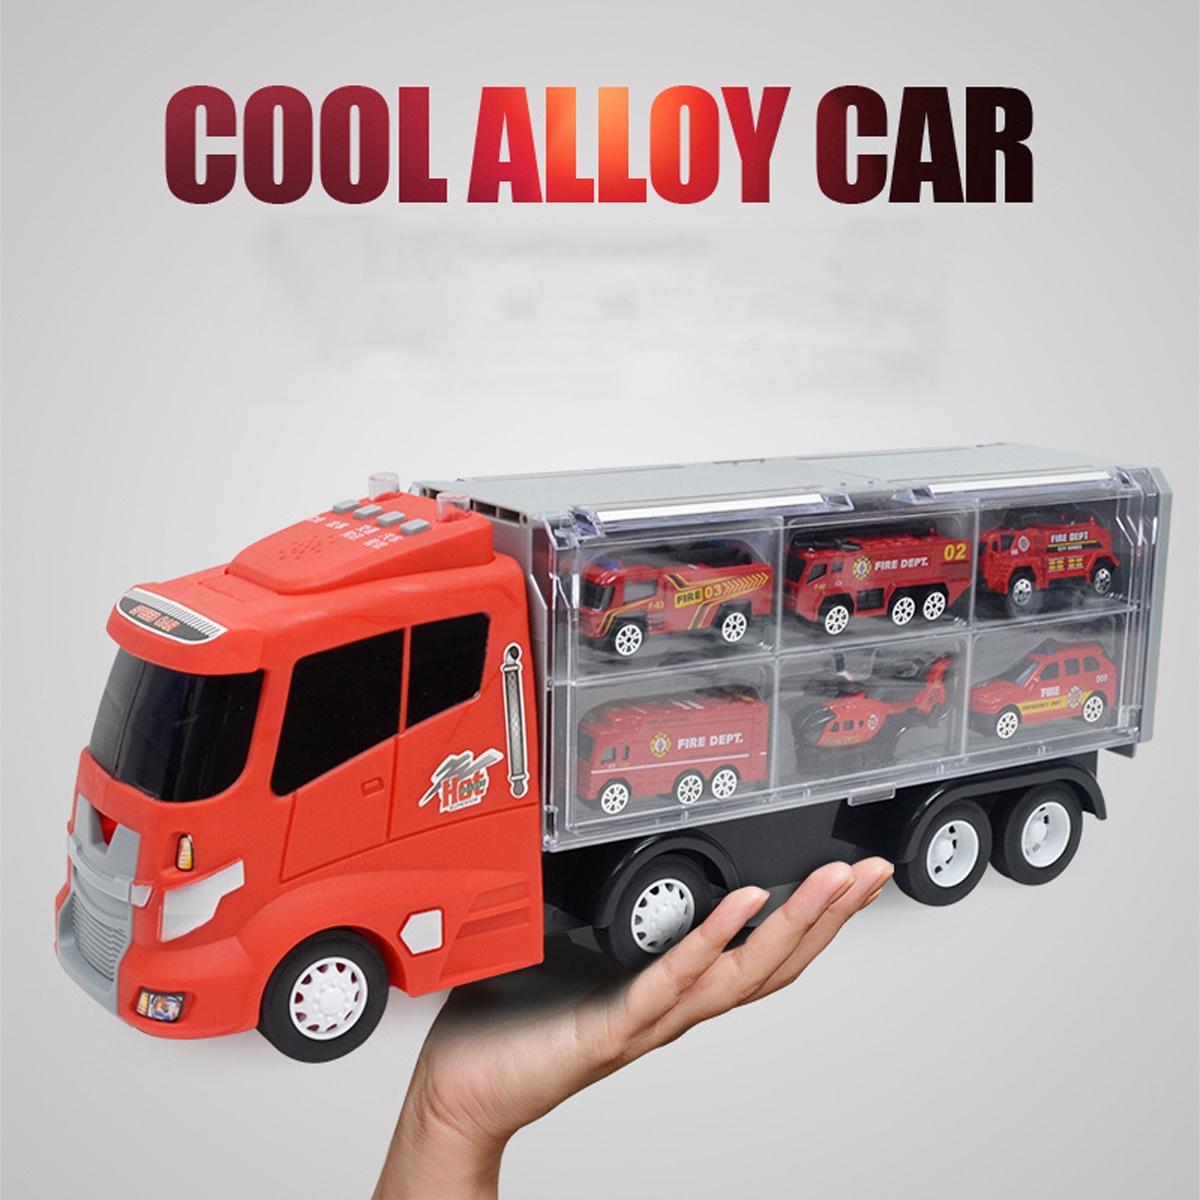 Engineering-Alloy-Car-Diecast-Model-Set-Portable-Storage-Large-Container-Transport-Vehicle-6-Loaded--1437822-2